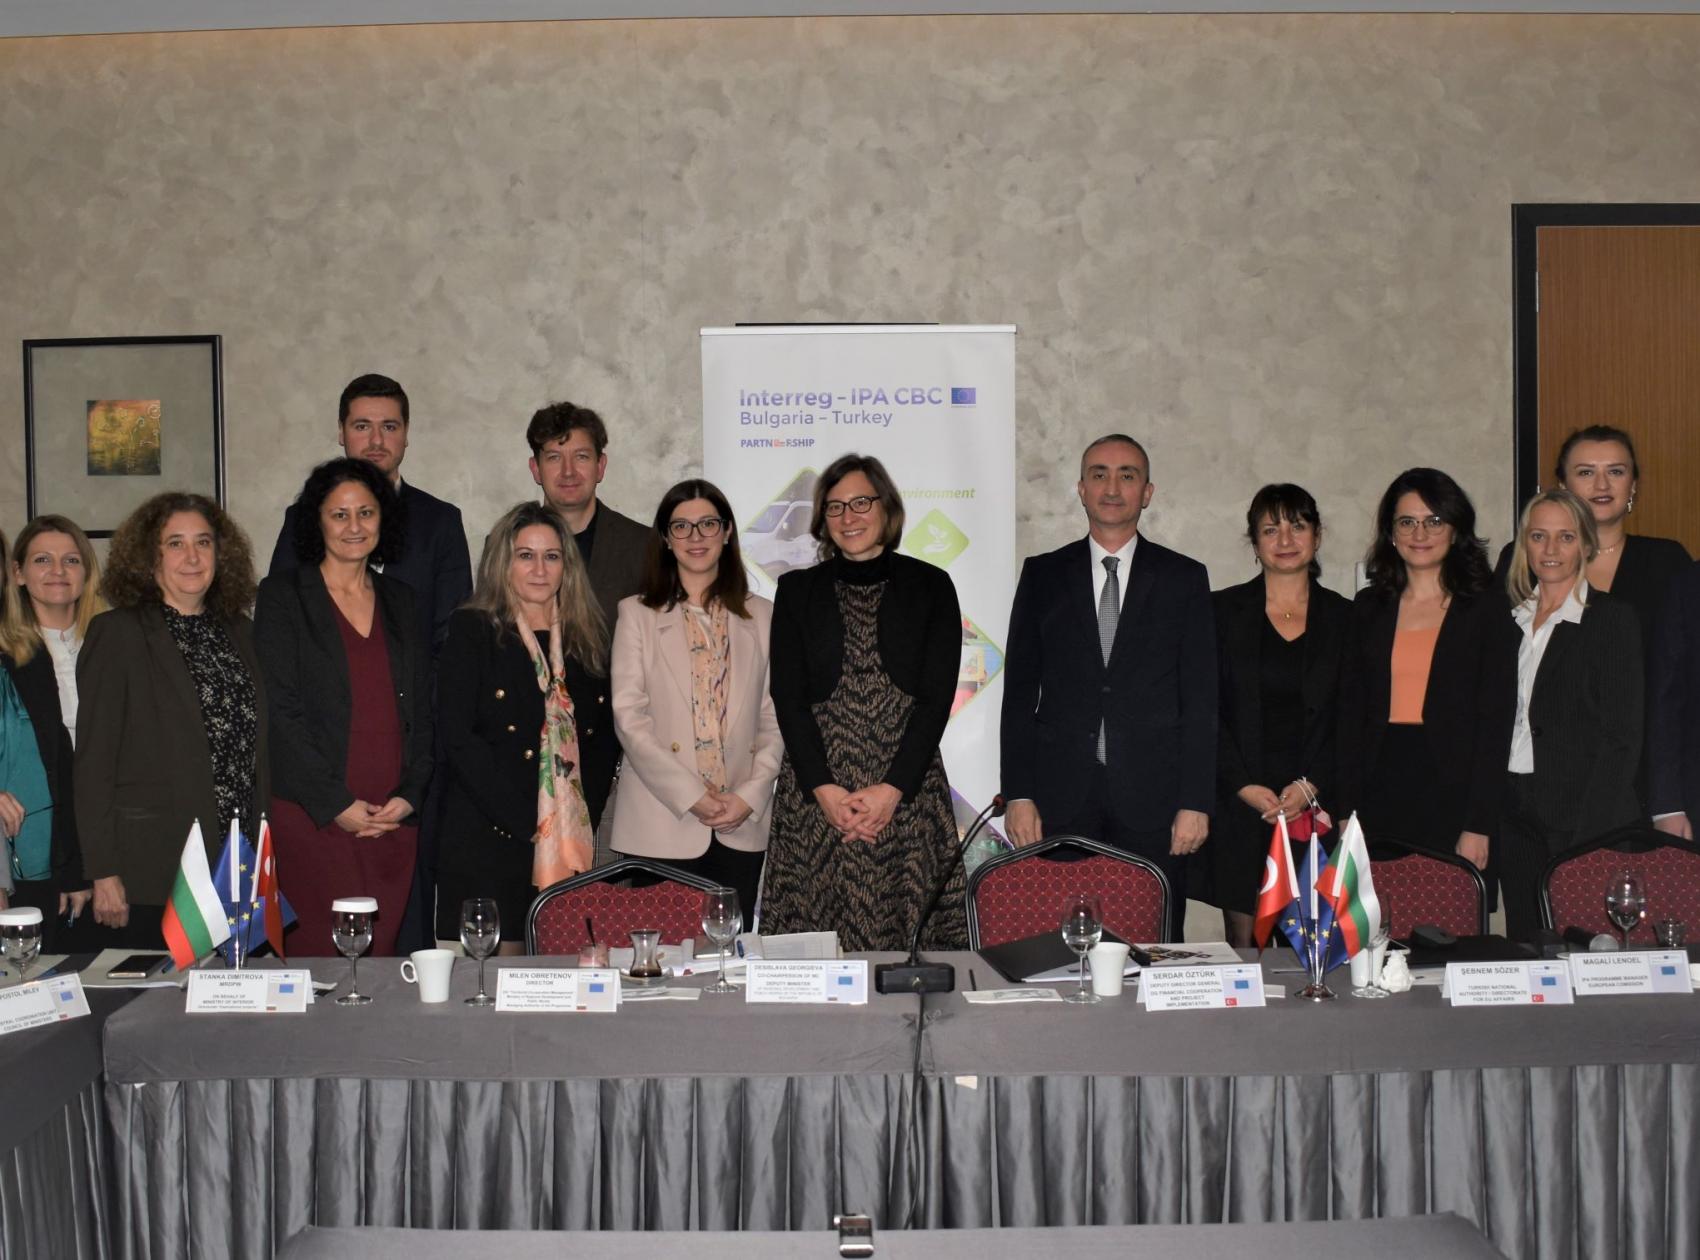 With the program for cross-border cooperation between Bulgaria and Turkey